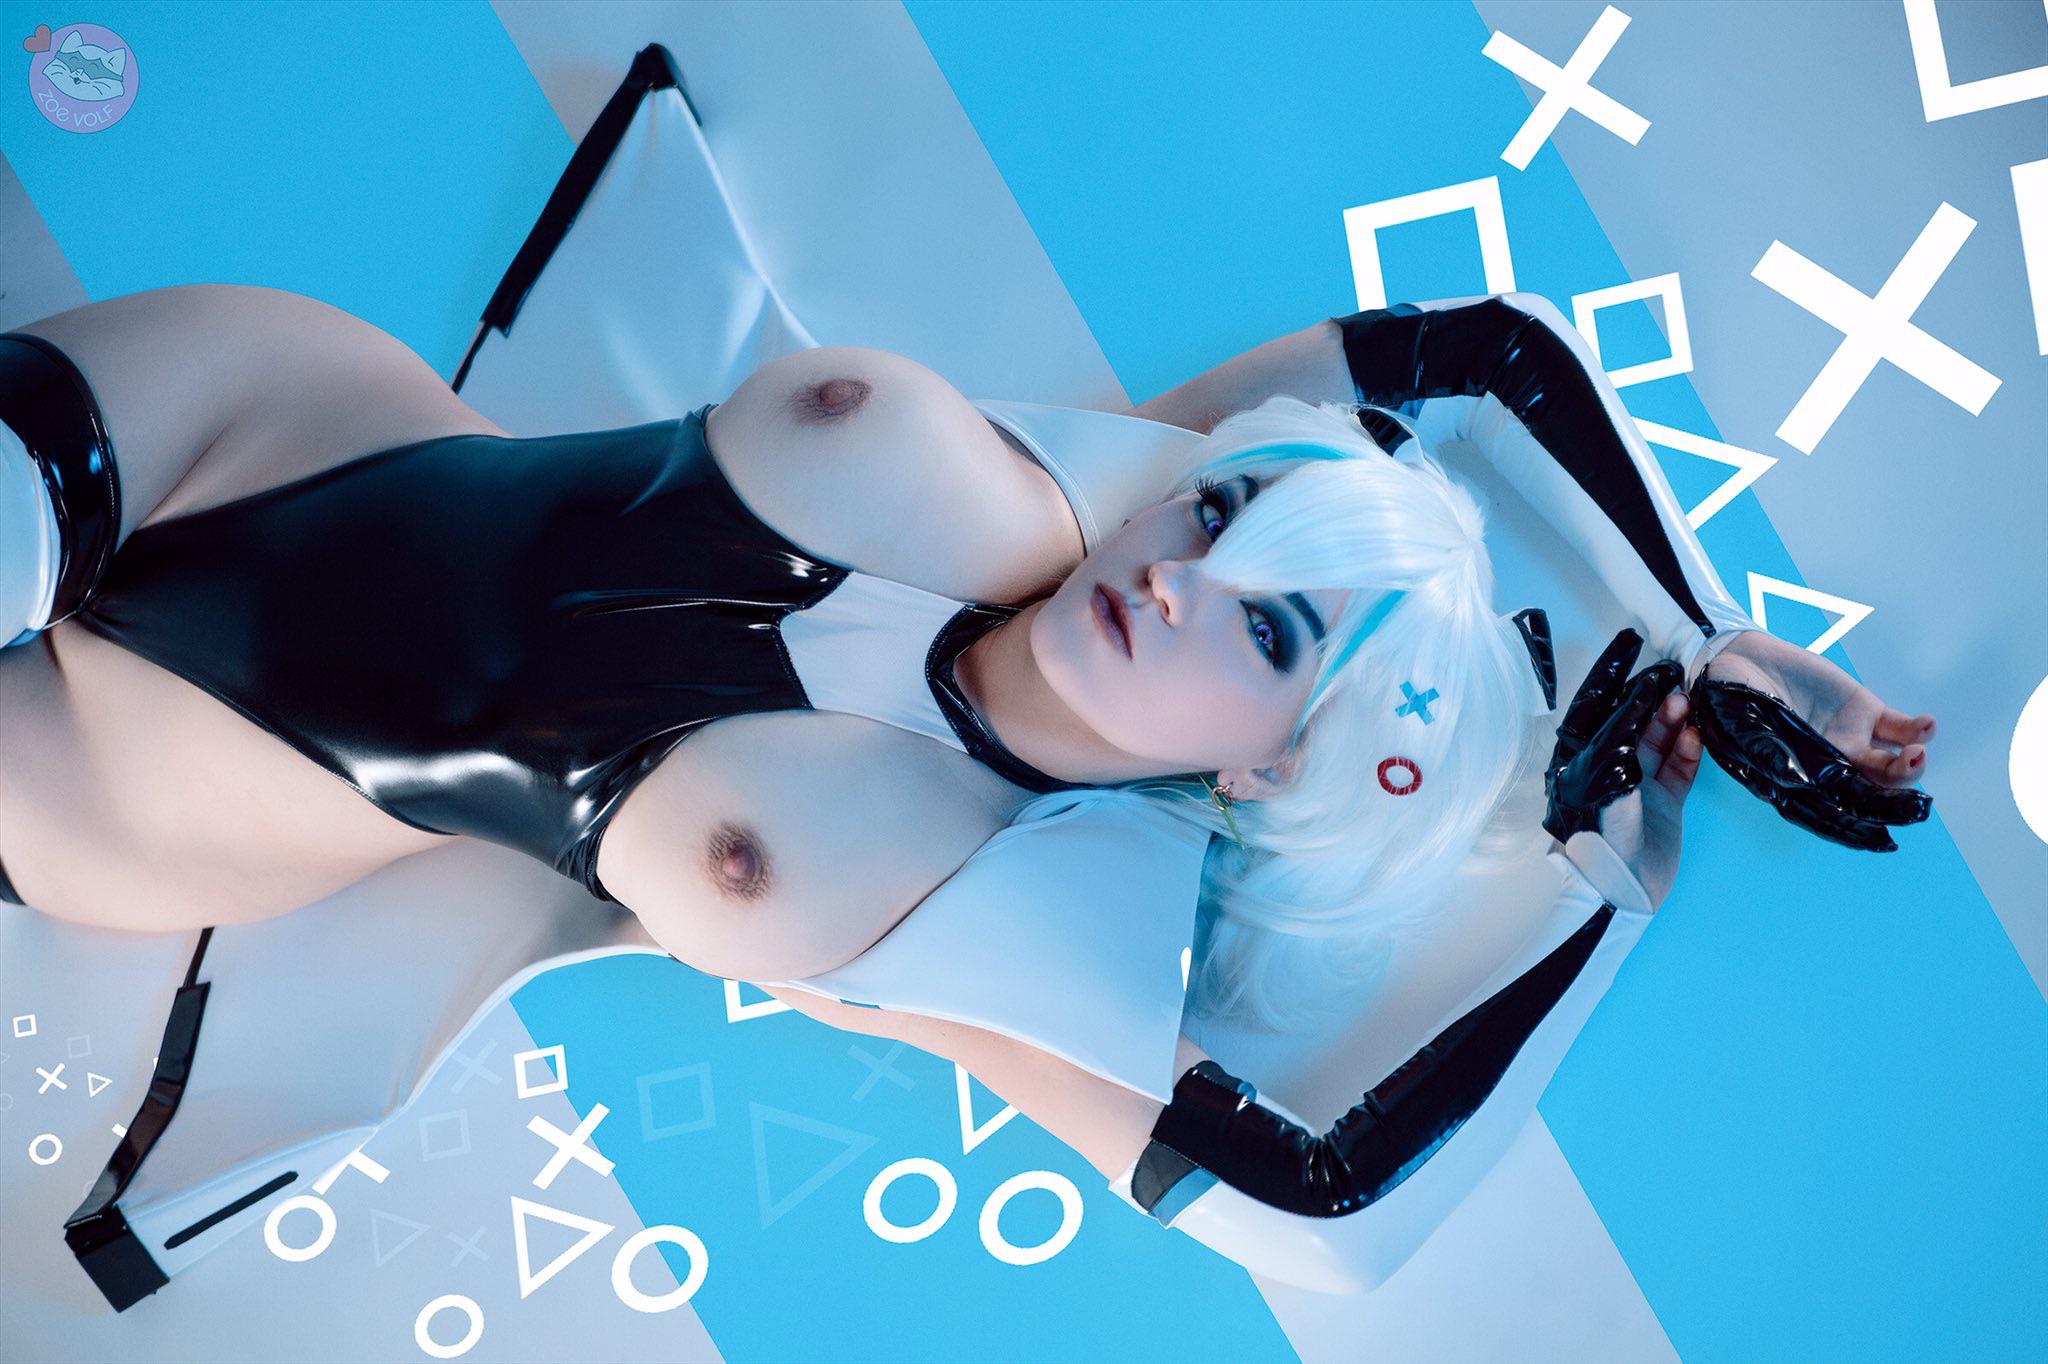 PS5-chan By Zoe Volf